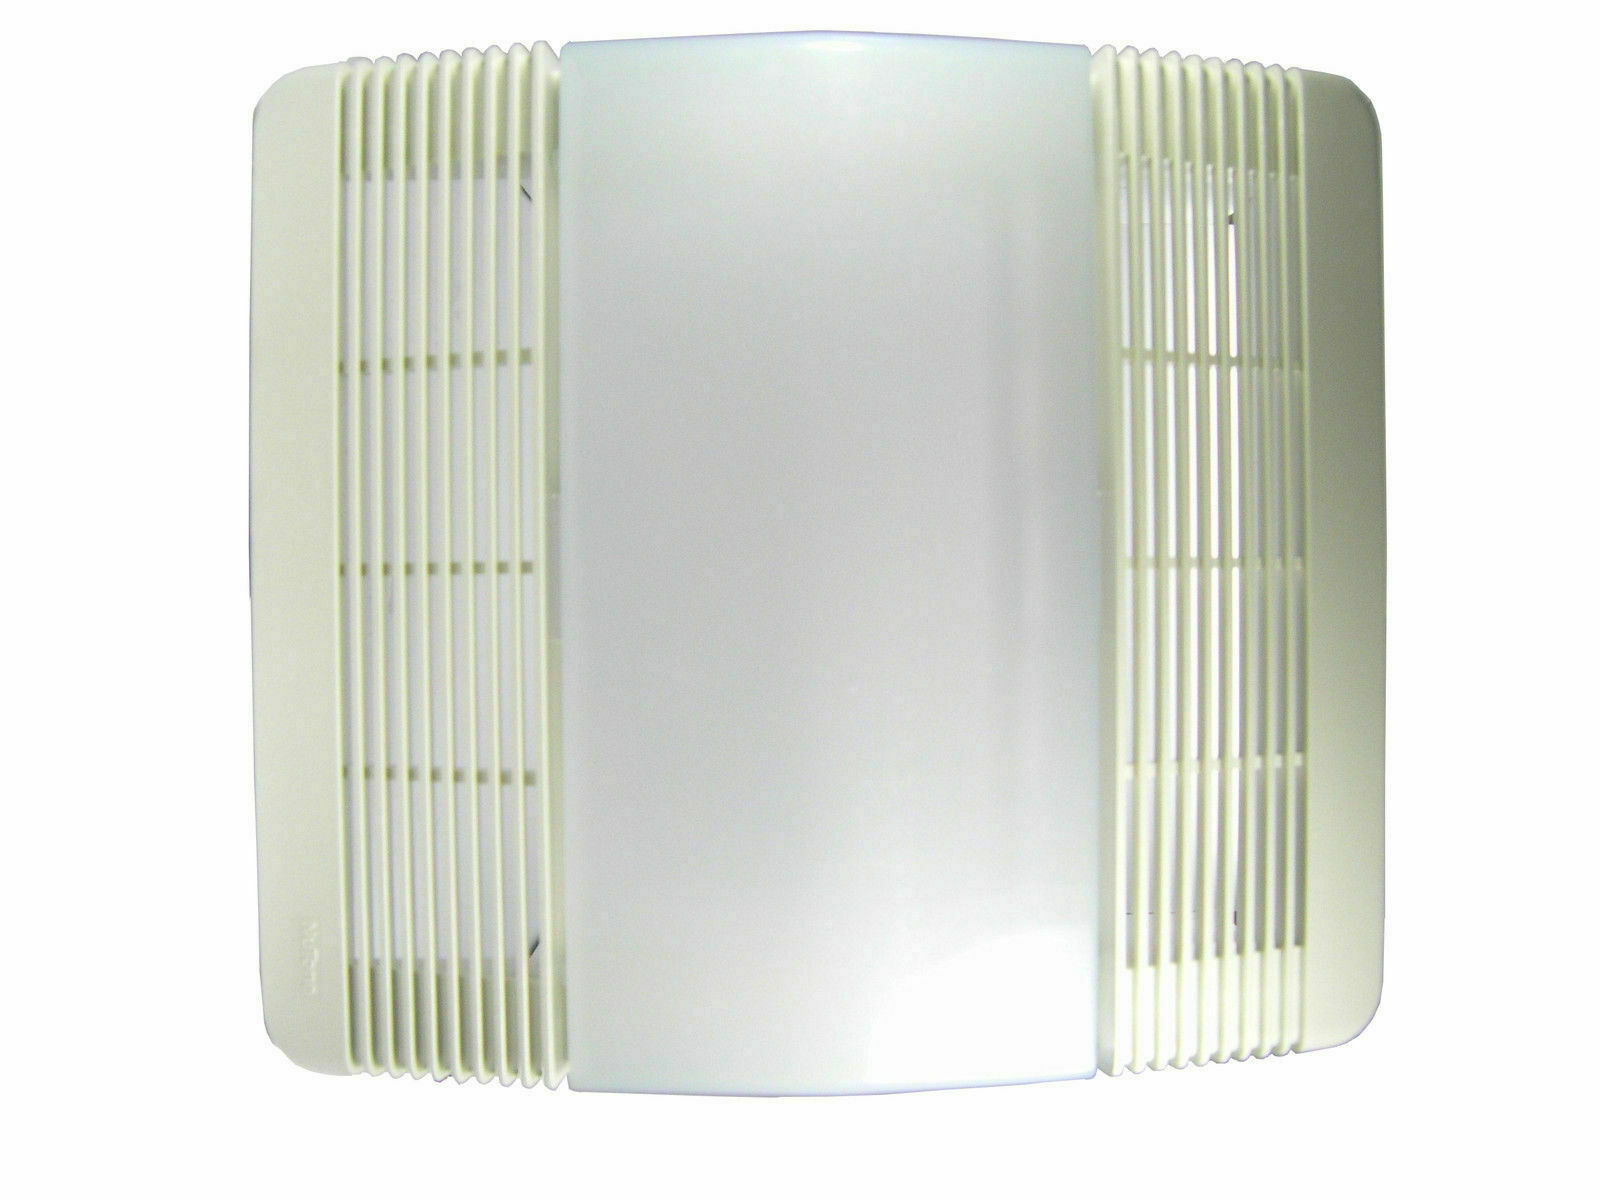 85315000 Nutone Grille Light Lens For Bathroom Fan Exhaust 763rln 769rln throughout proportions 1600 X 1200